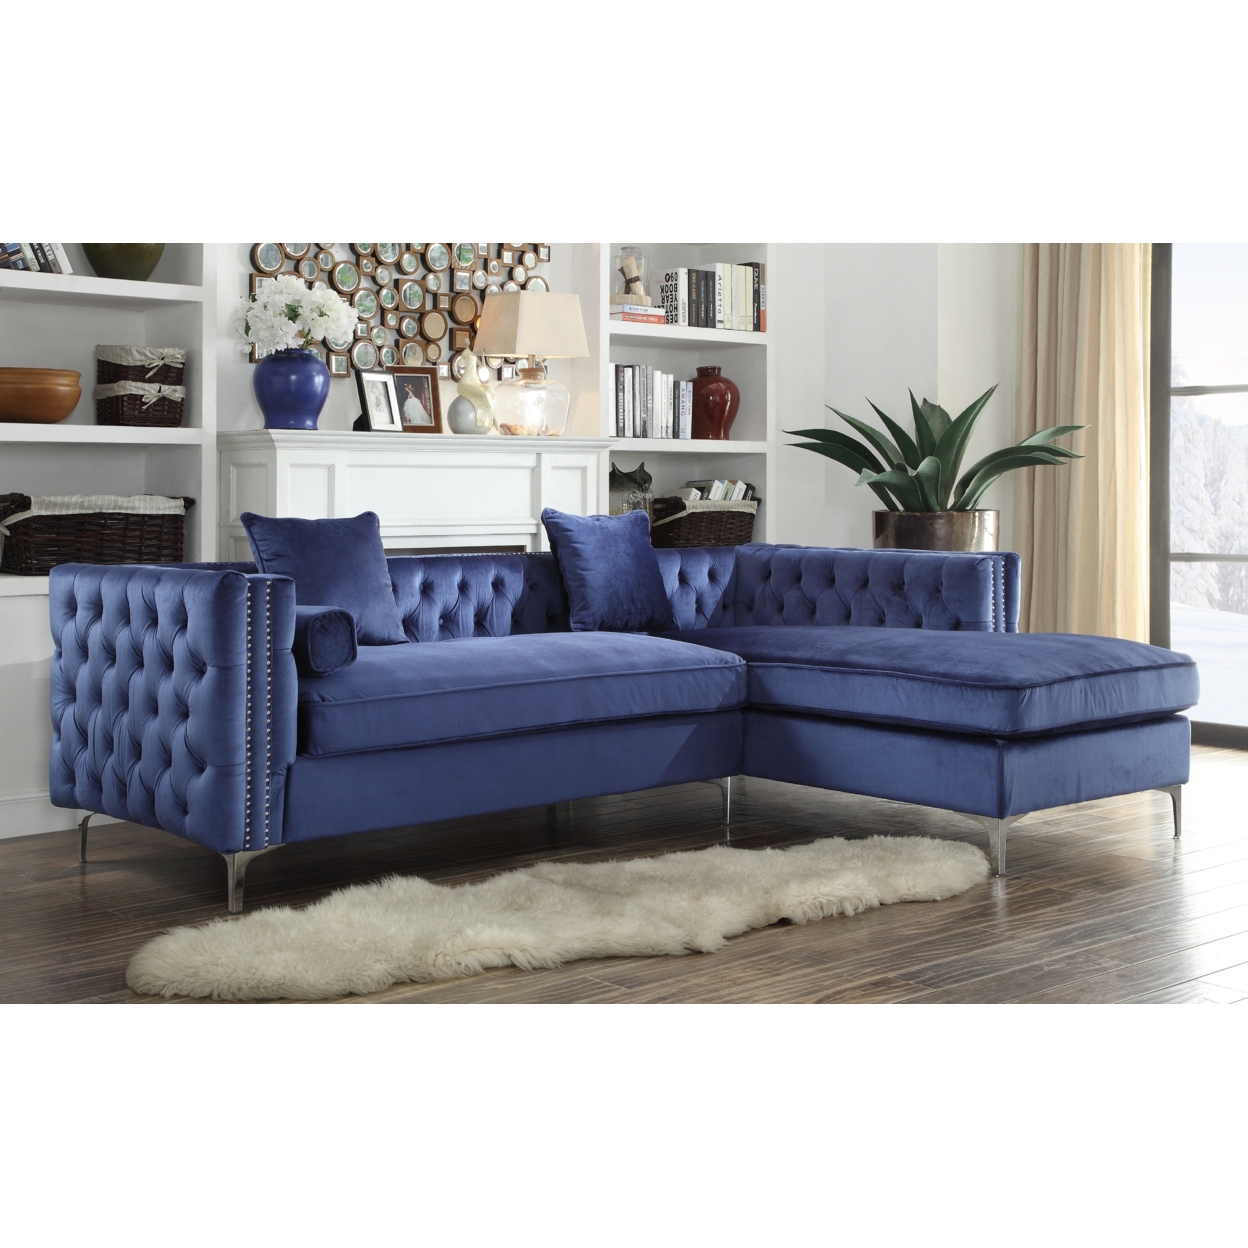 Picasso Velvet Right Facing Sectional Sofa Button Tufted With Silver Nailhead Trim Silvertone Metal Y-leg - Navy